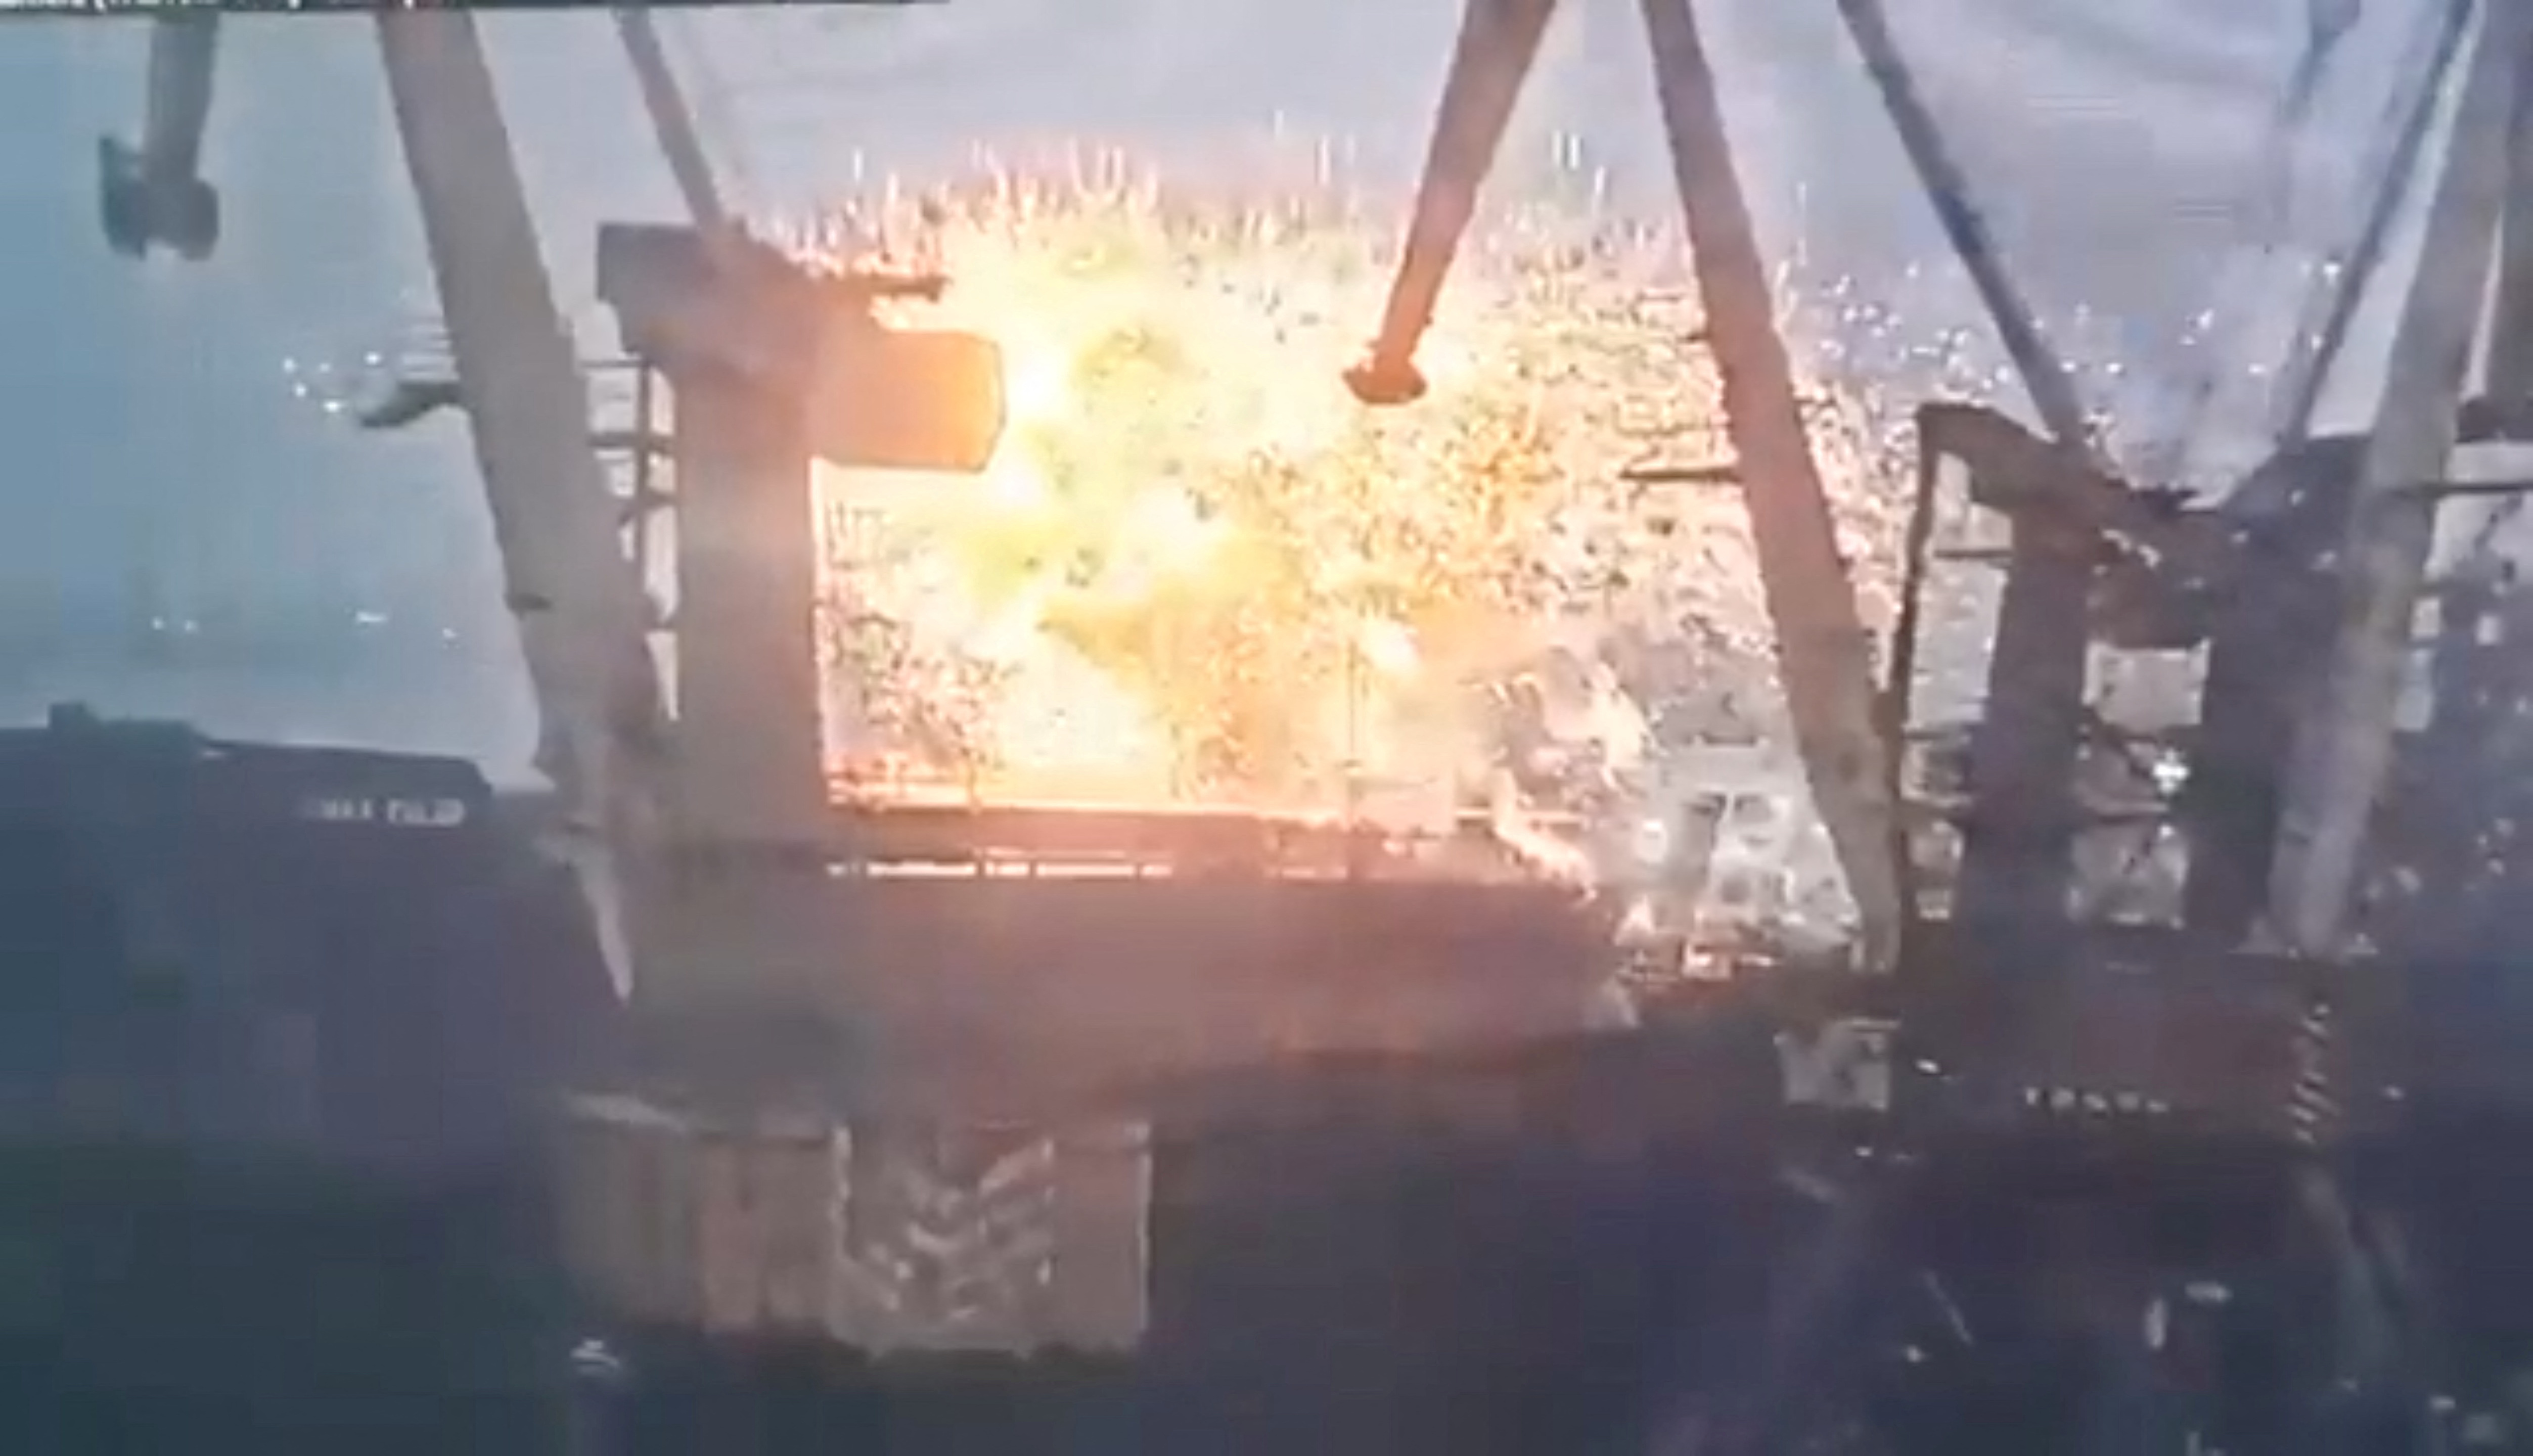 Screen grab obtained from social media shows the moment of a missile strike on a Liberian-flagged civilian ship in a Ukrainian port